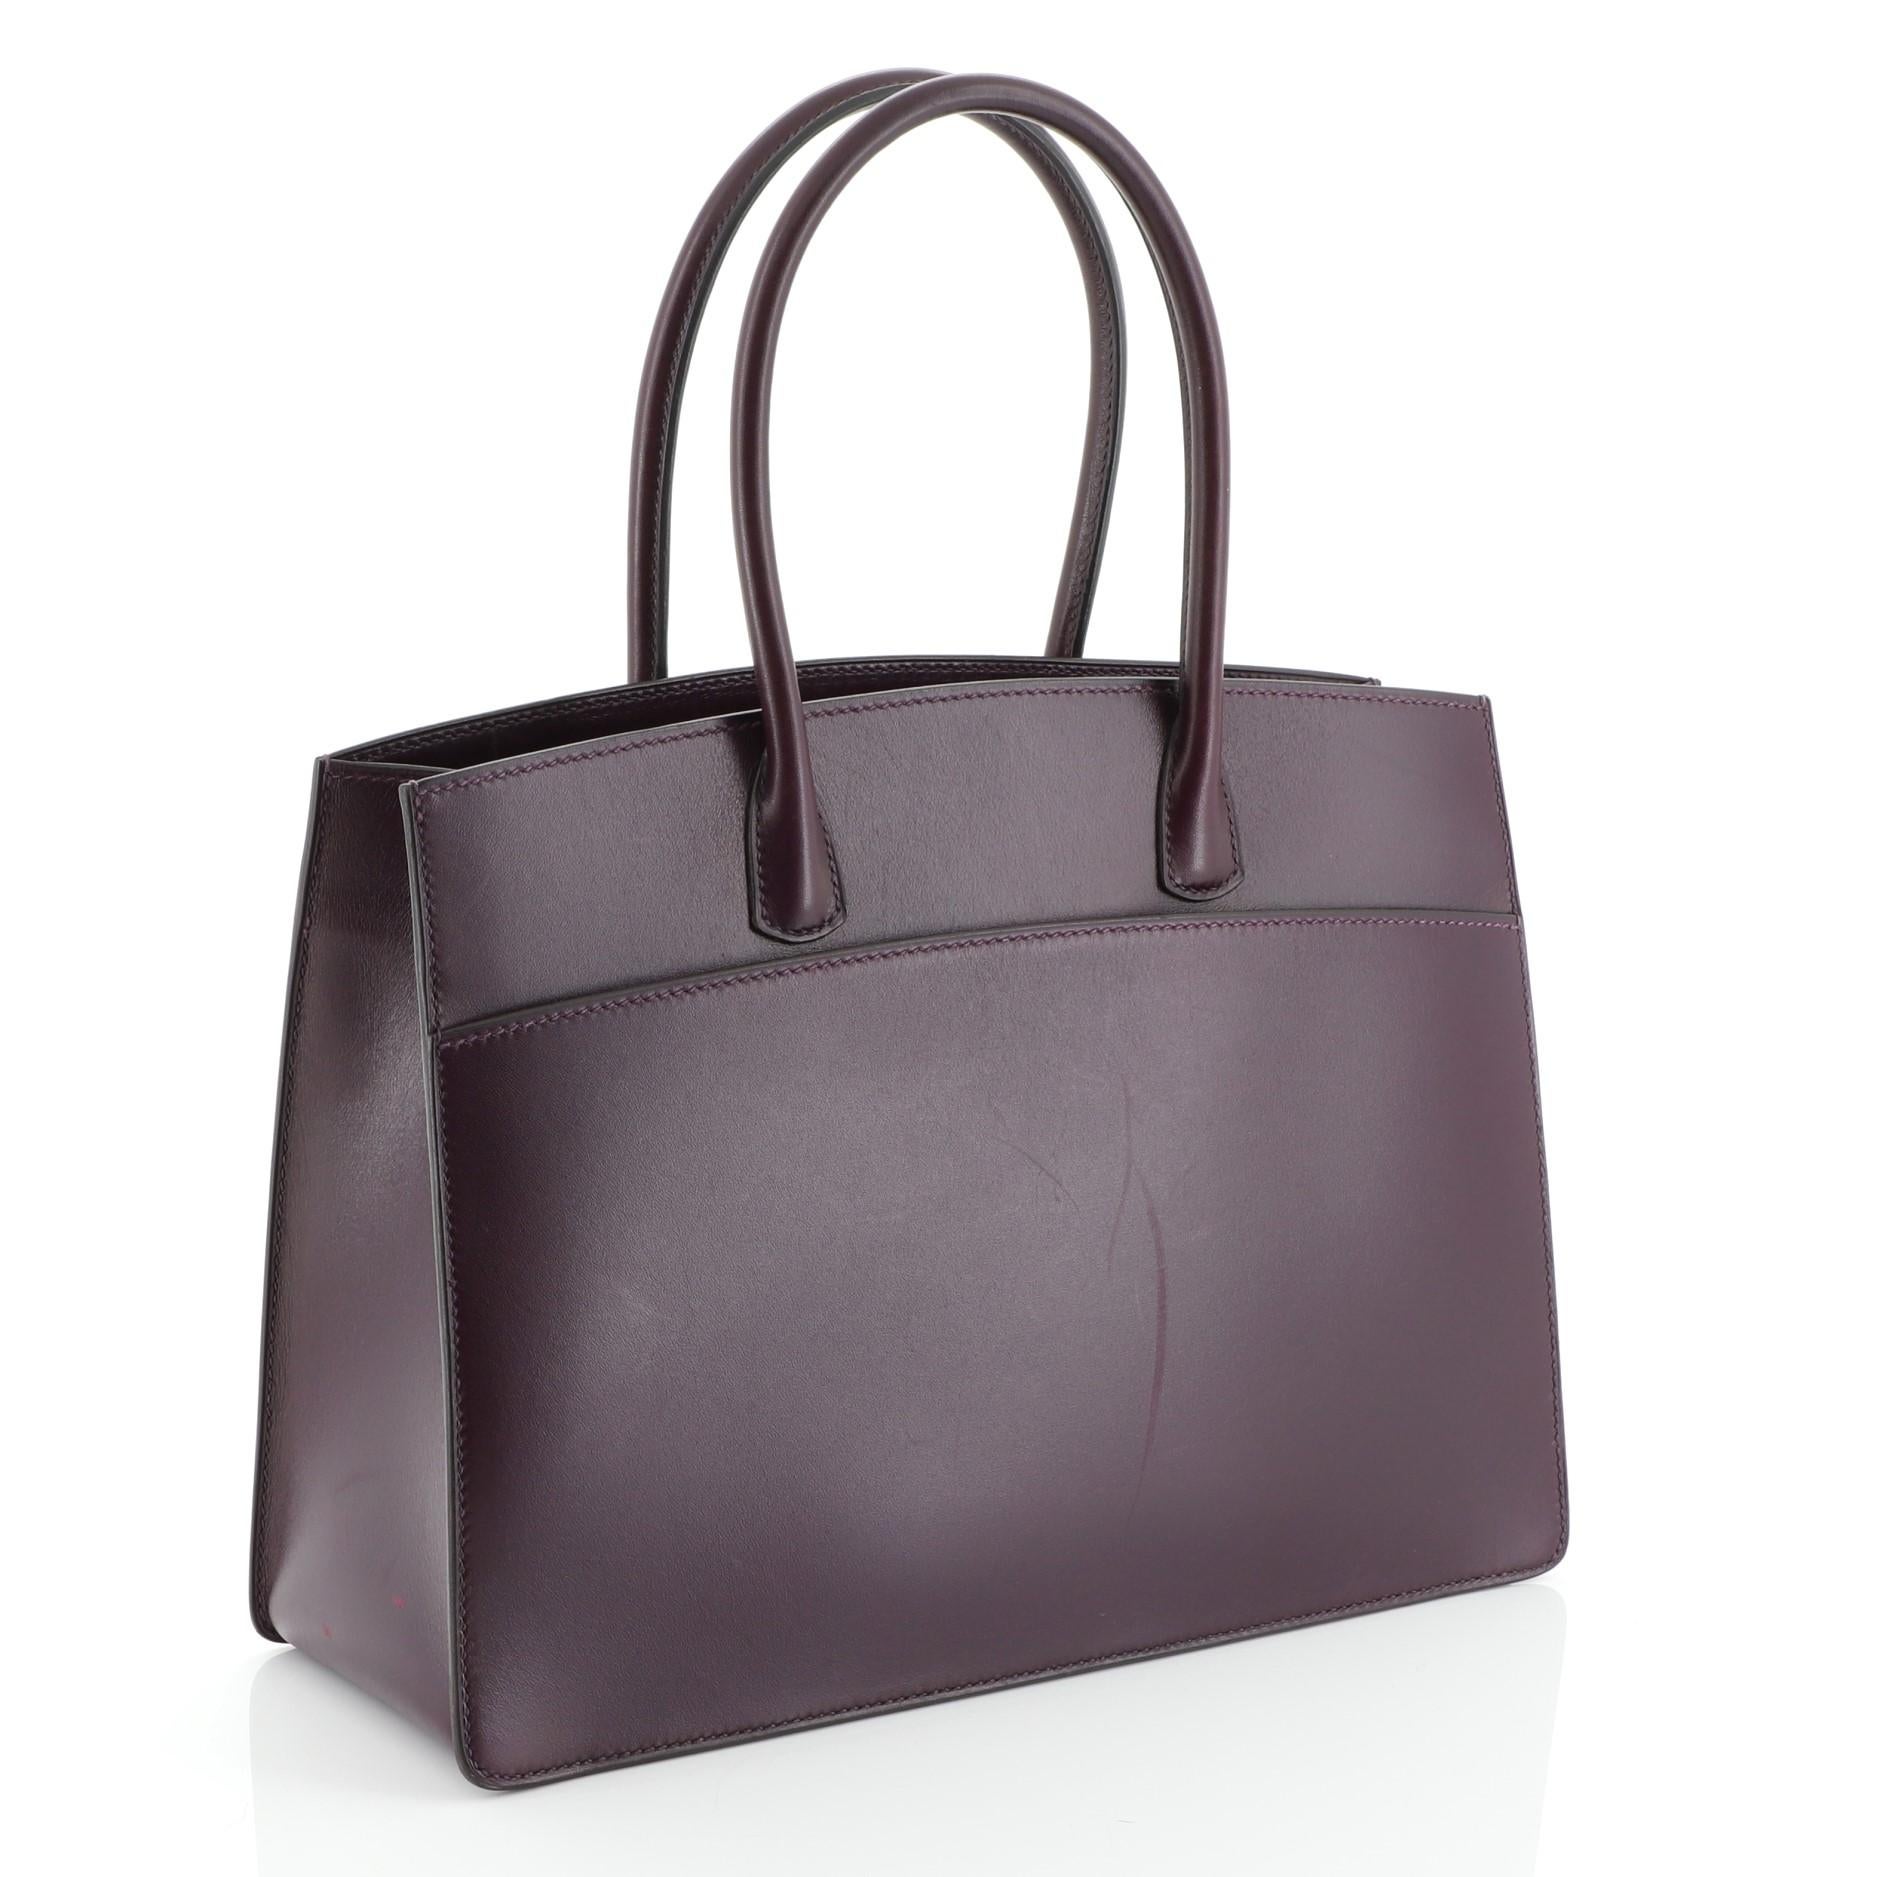 This Hermes Horizontal White Bus Handbag Leather 30, crafted in Raisin purple Box Calf leather, features dual rolled handles and gold hardware. It opens to a Raisin purple Chevre leather interior. Date stamp reads: F Square (2002). These are